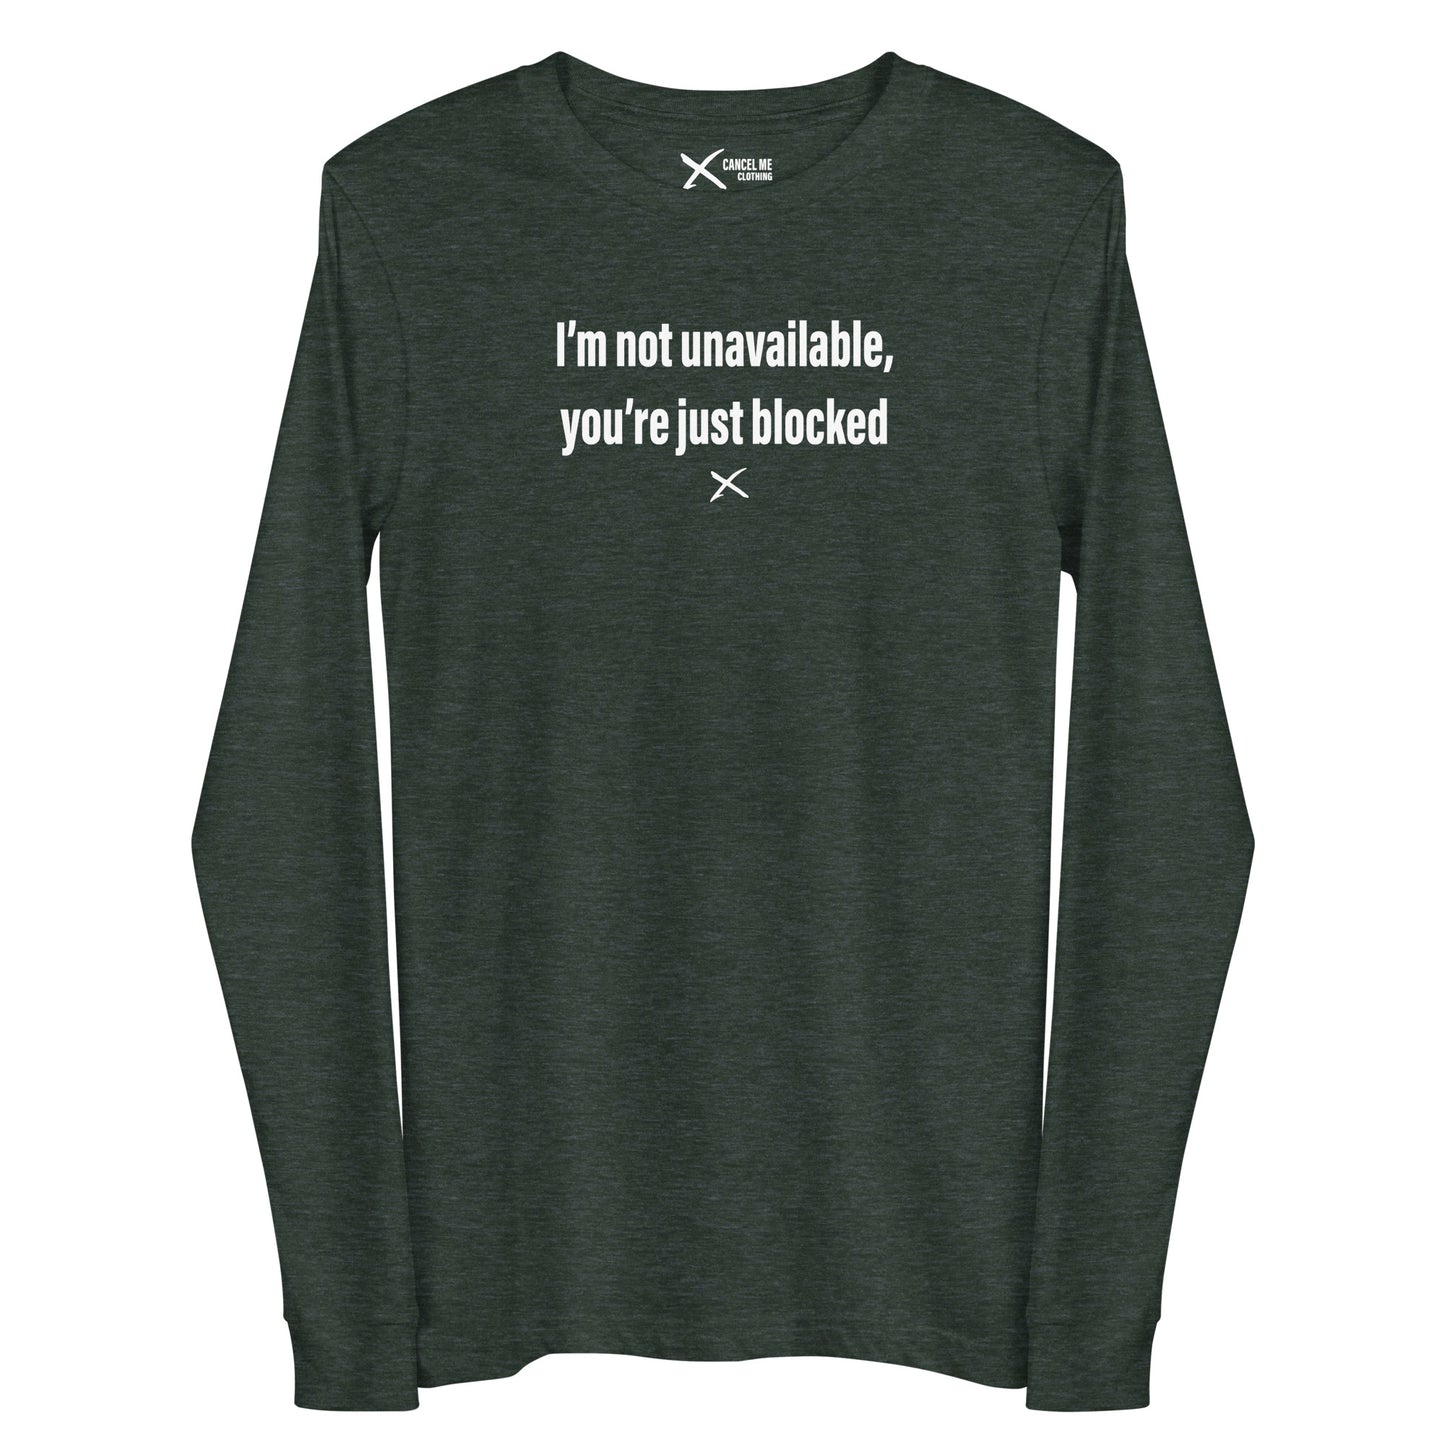 I'm not unavailable, you're just blocked - Longsleeve